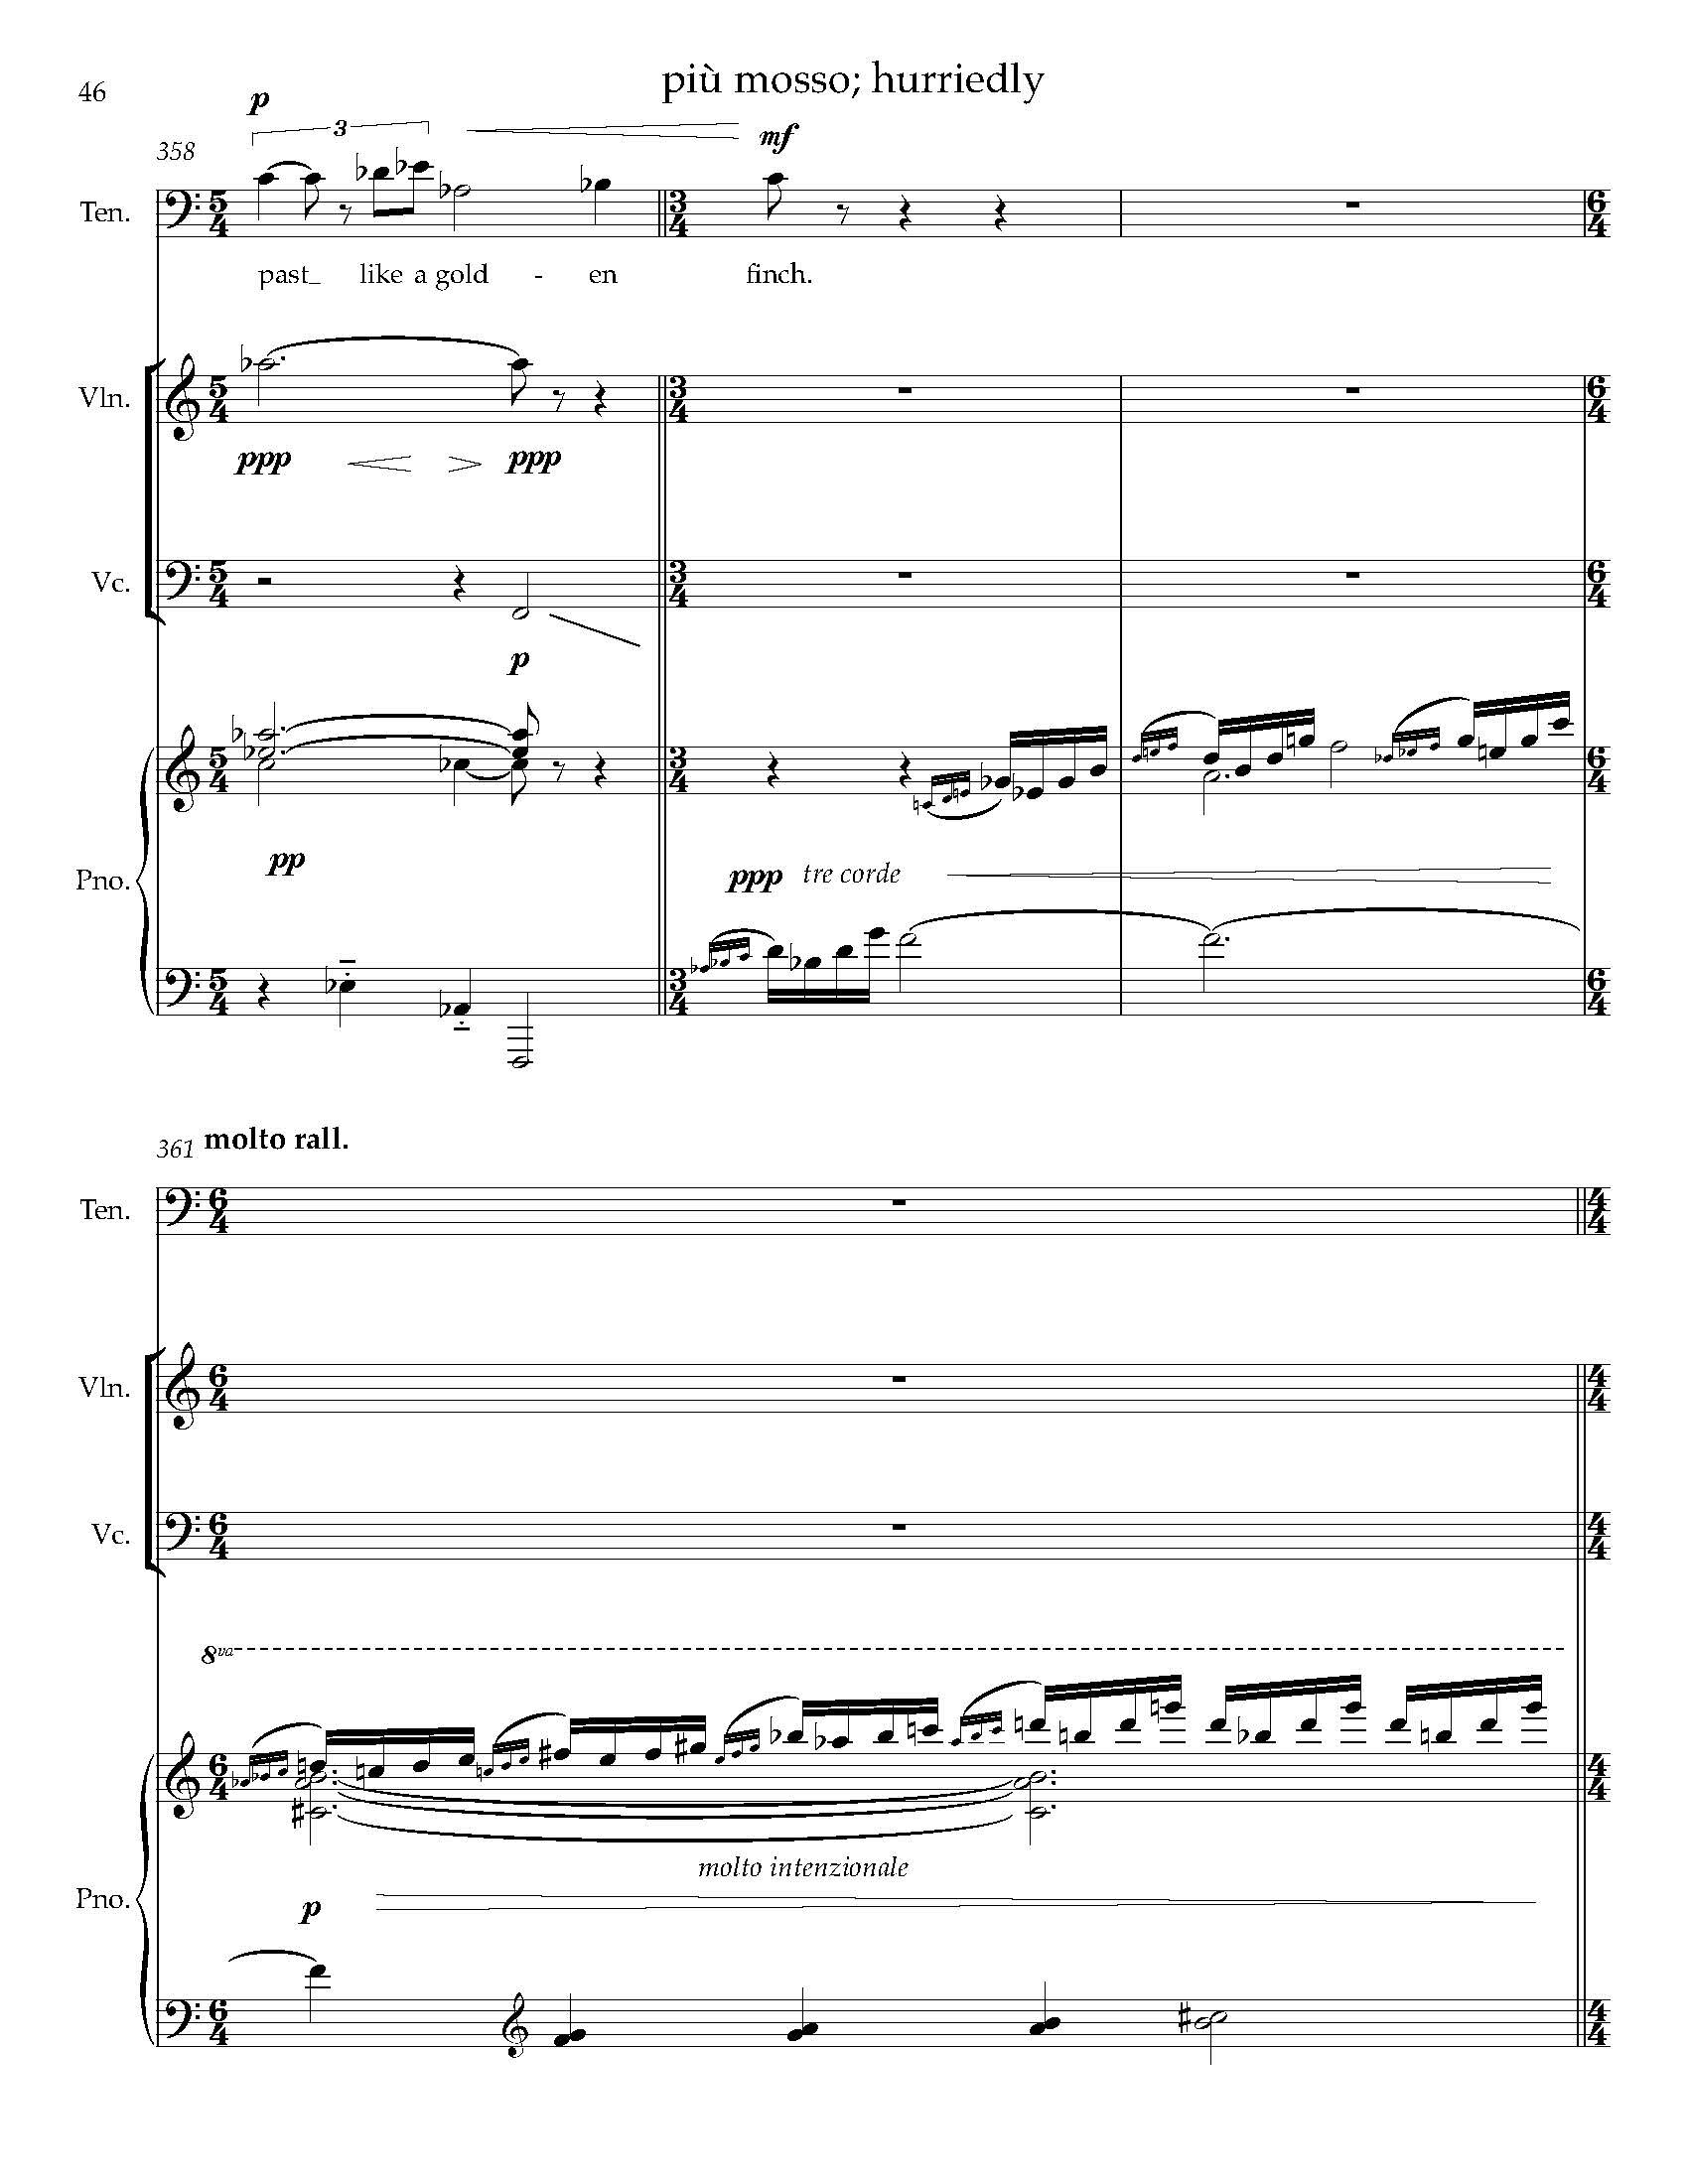 Gursky Songs - Complete Score_Page_54.jpg